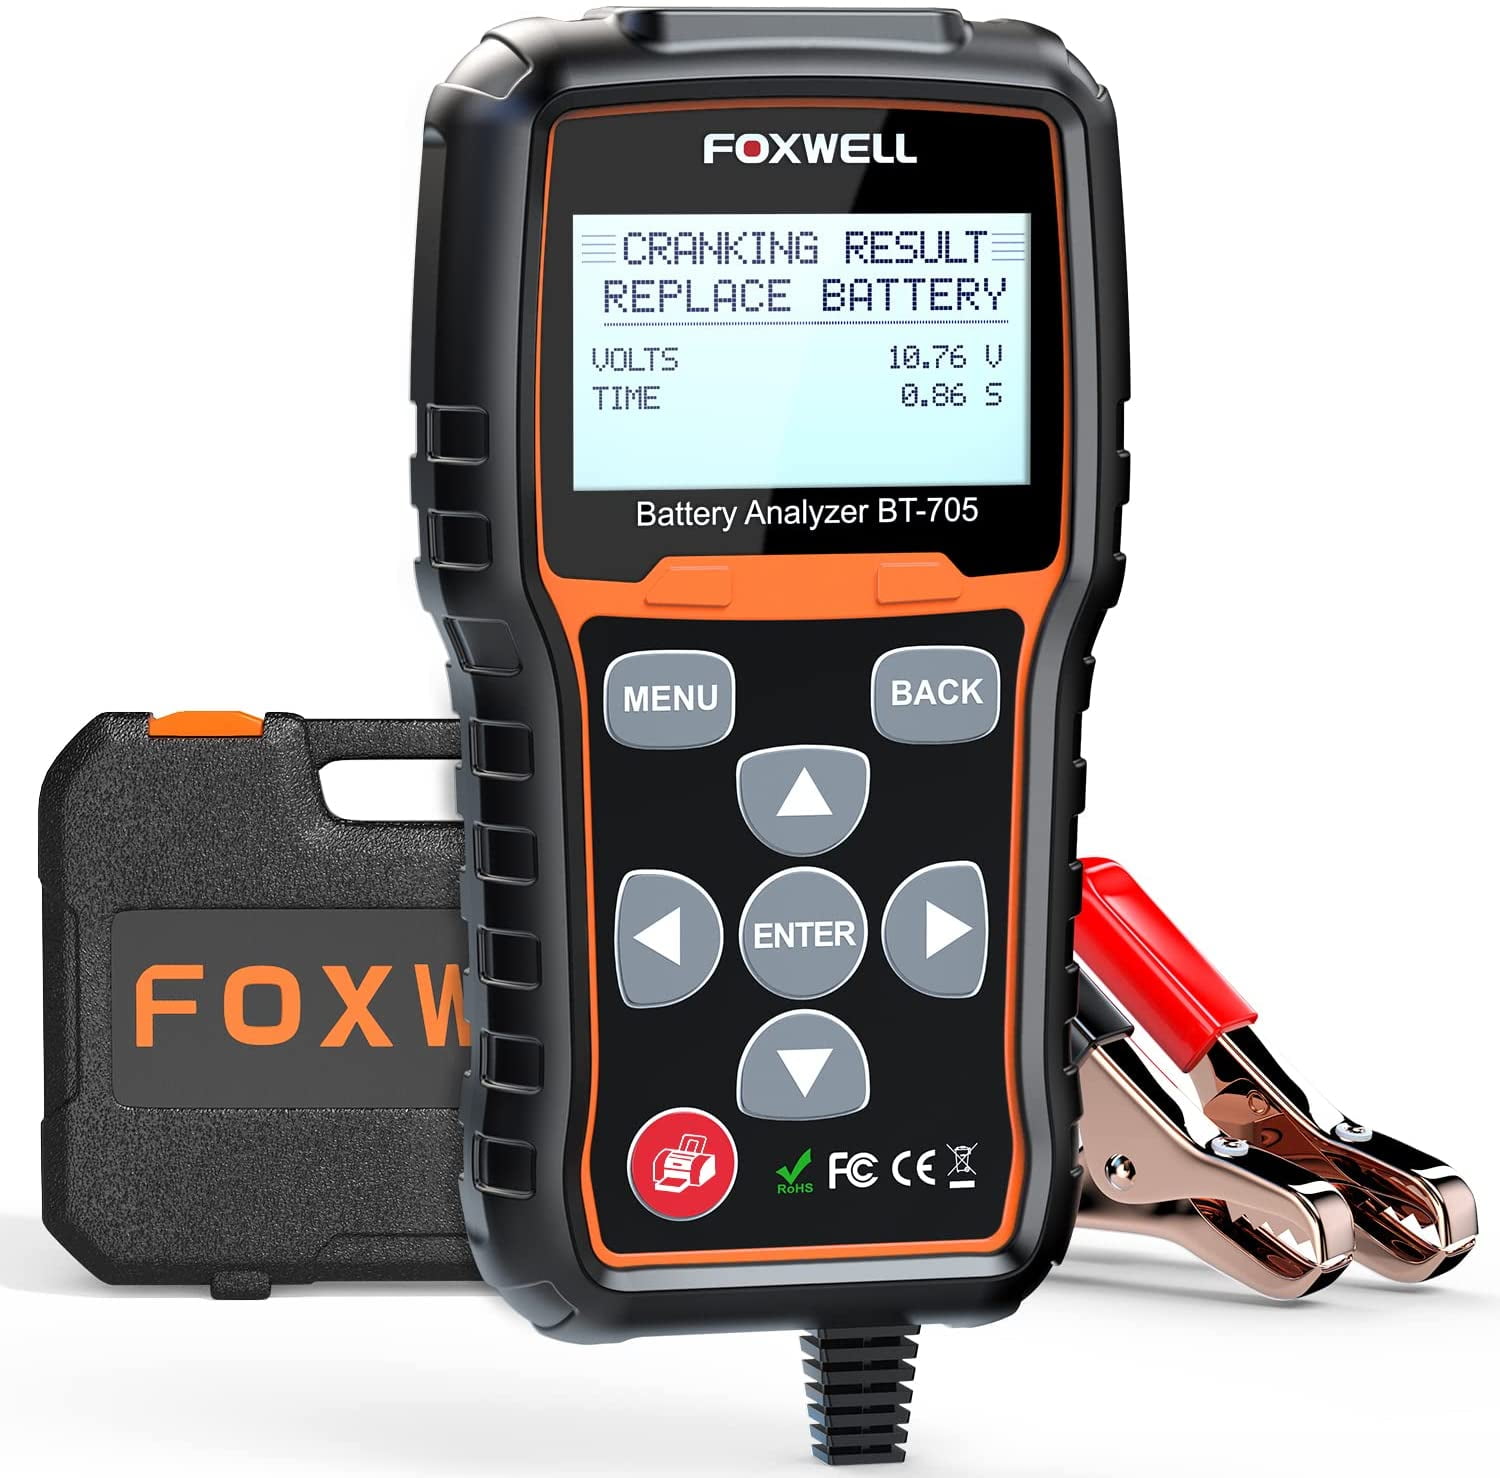 12V 24V Battery Load Tester FOXWELL BT705 Analyzer for Cars and Heavy Duty Truck 